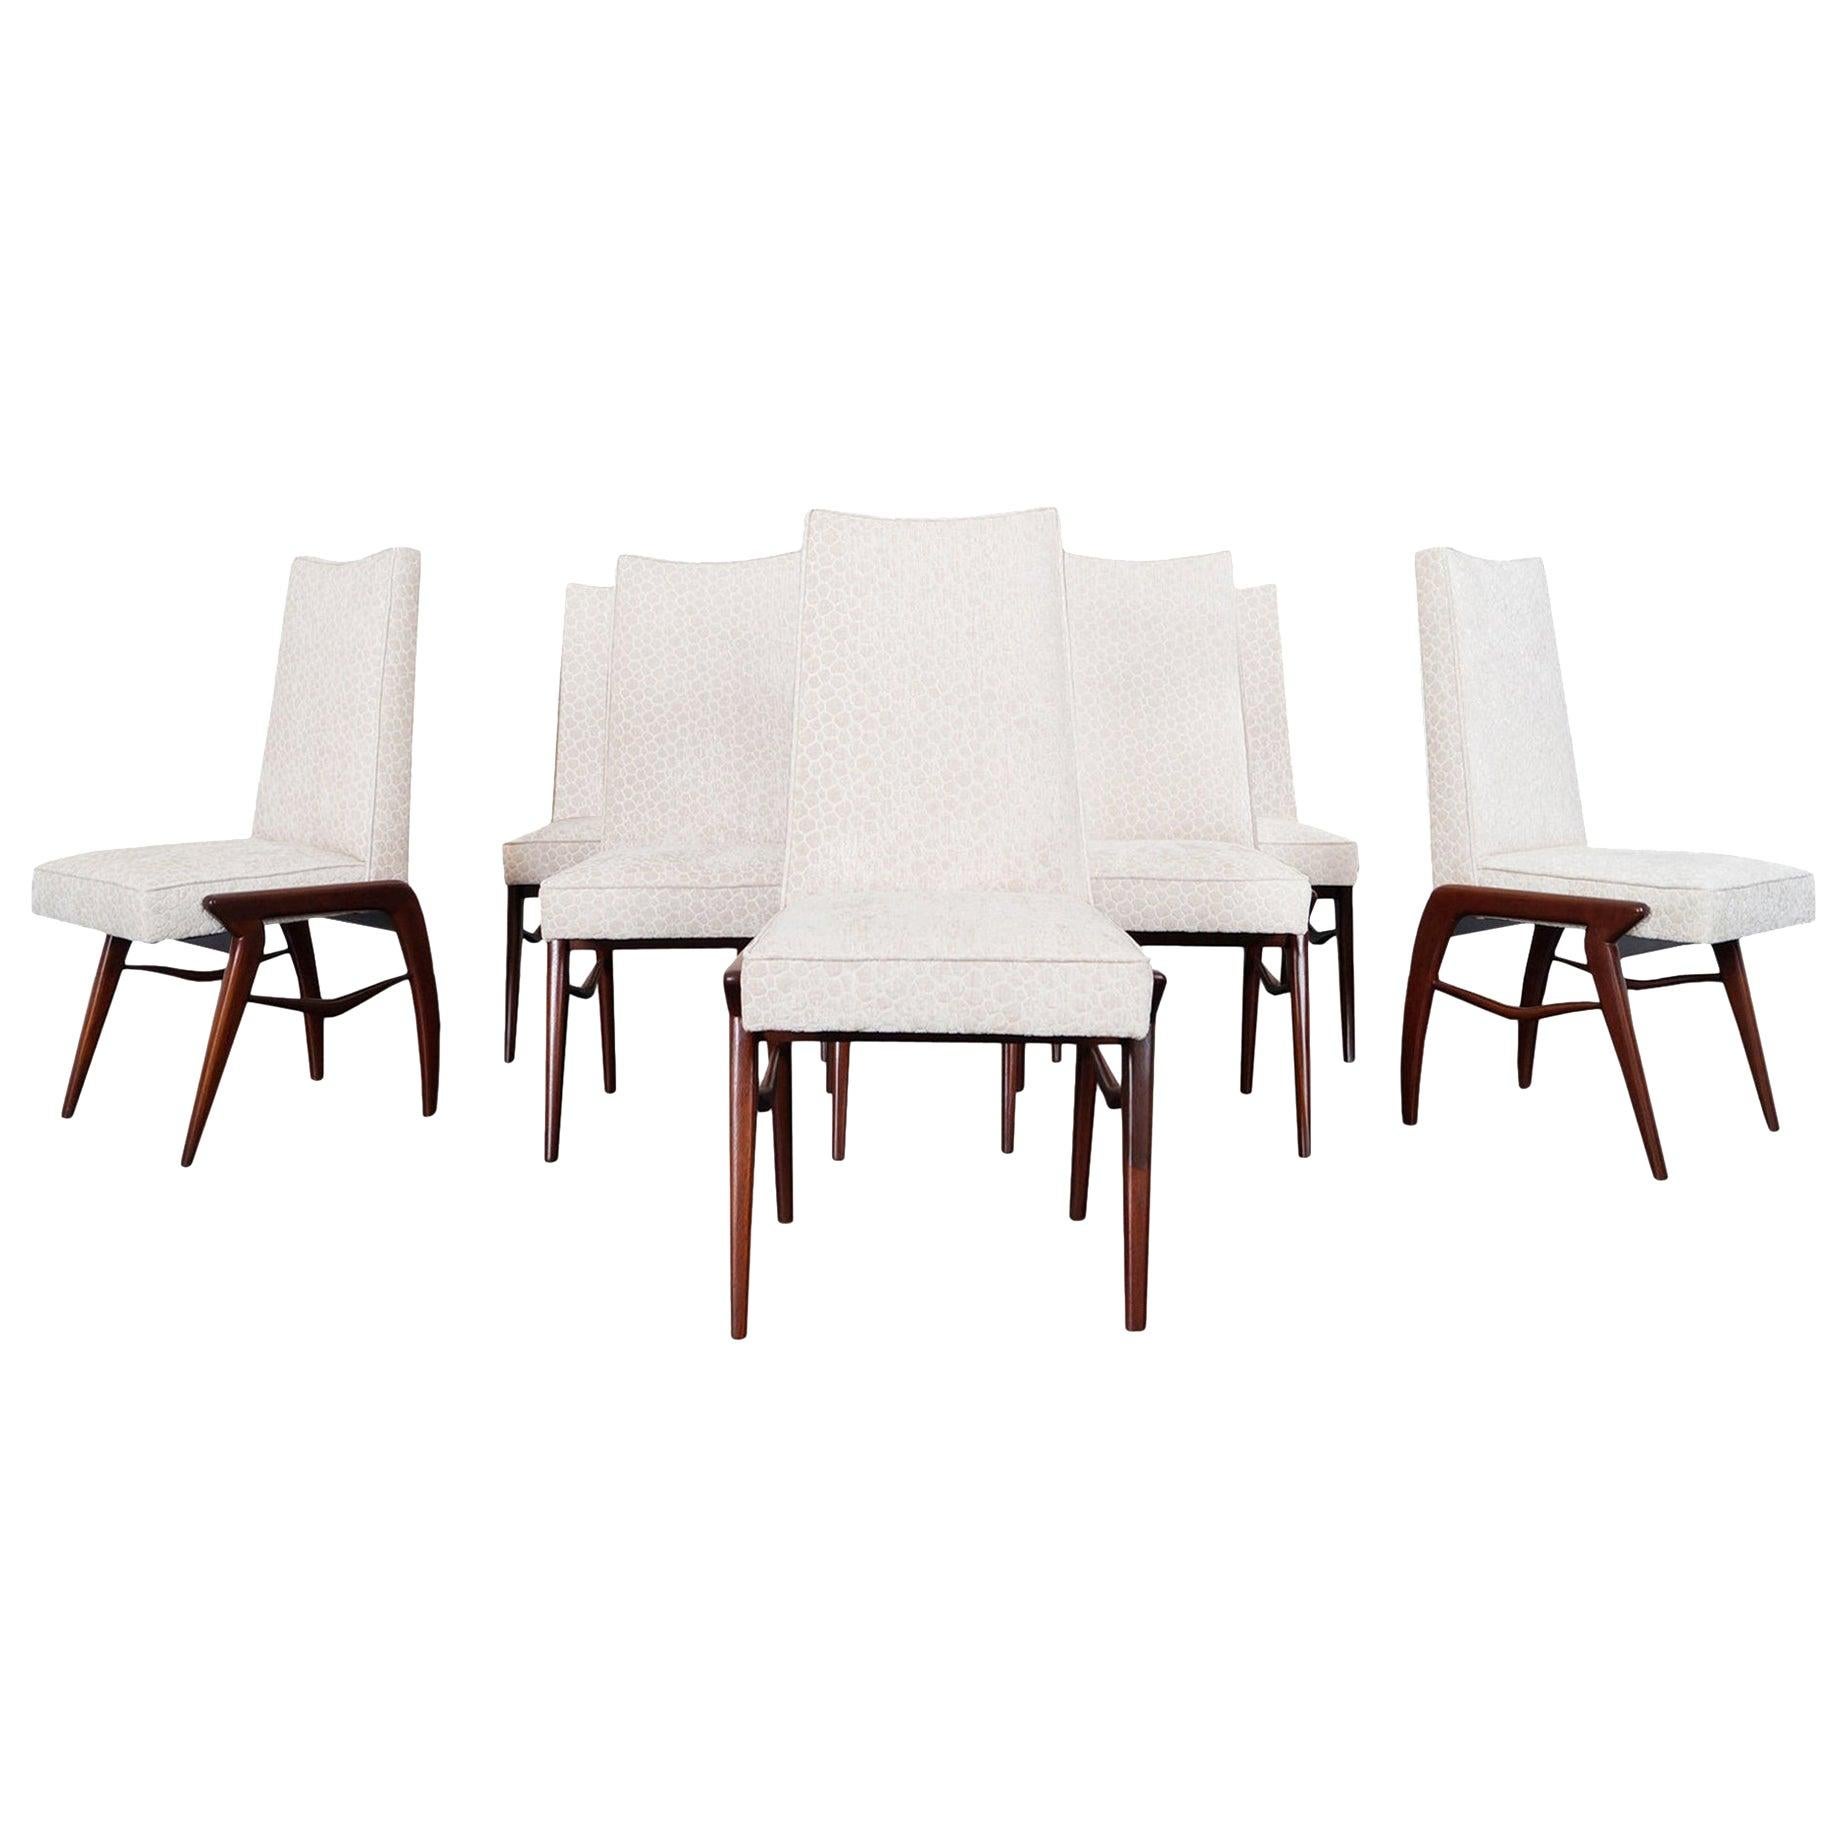 Mexican Modernist Walnut Dining Chairs by Eugenio Escudero